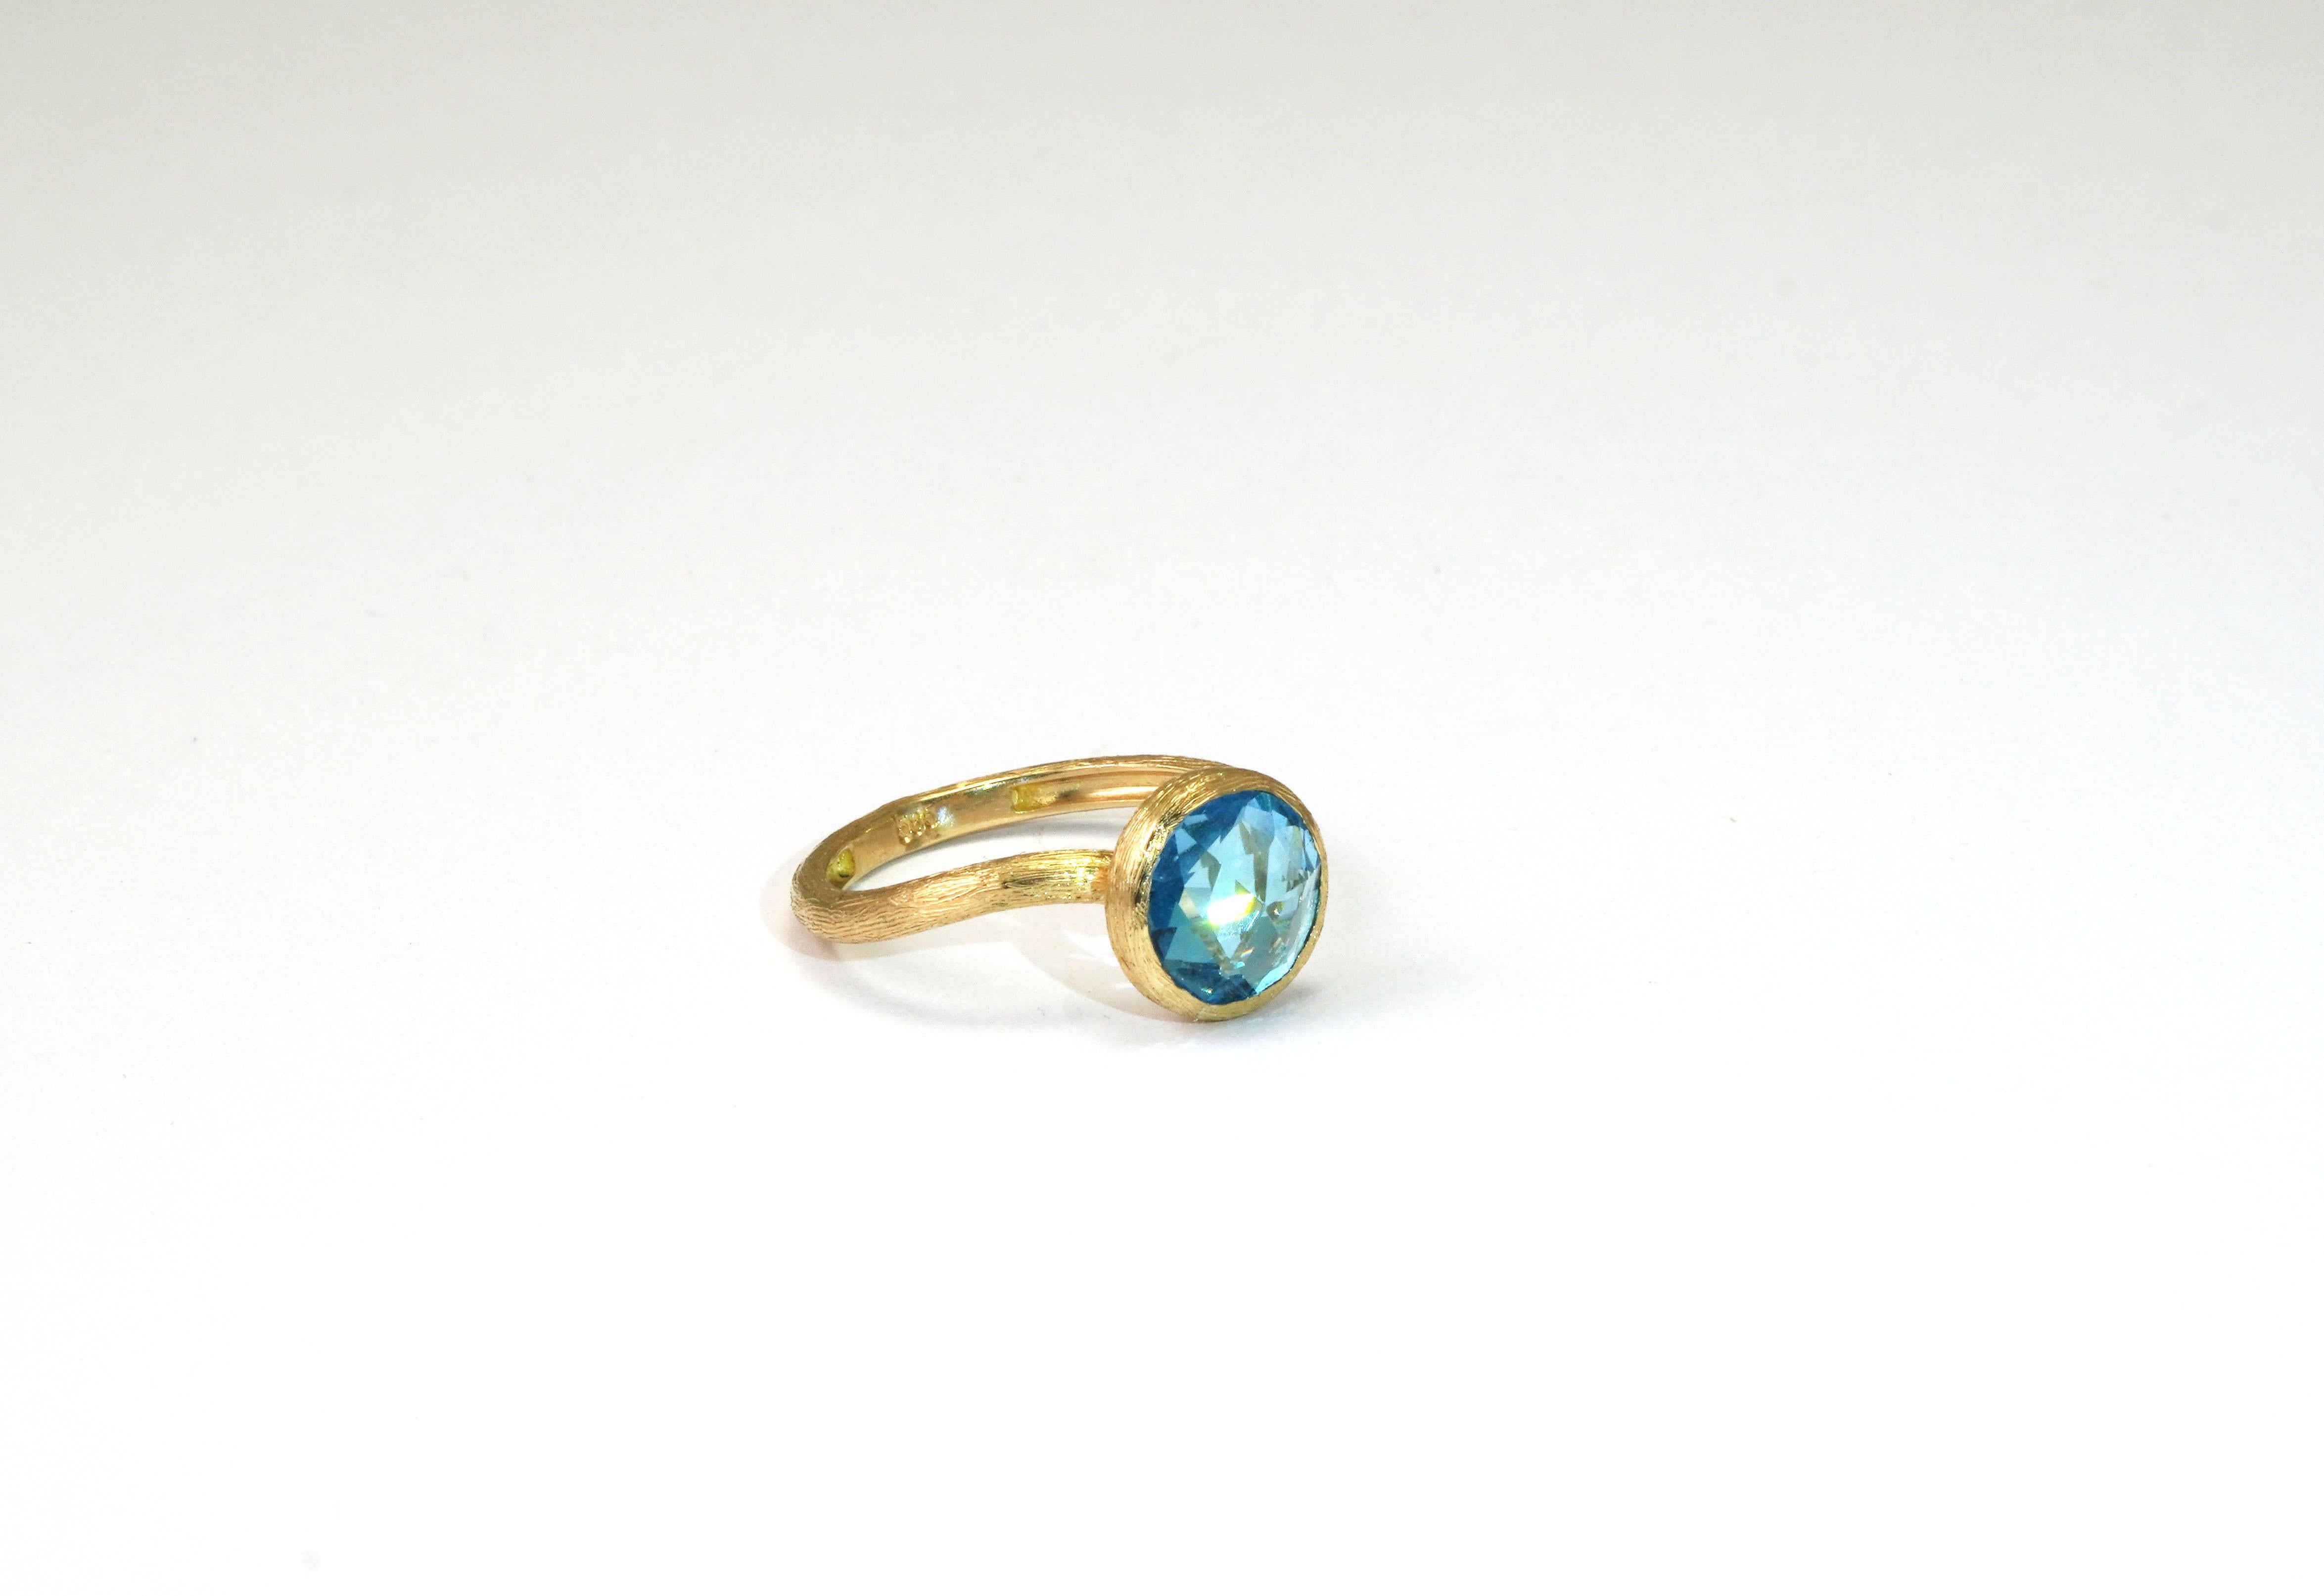 14 kt Yellow Gold ring with Blue Topaz
Gold color: Yellow
Ring size: 6 3/4 US
Total weight: 3.15 grams

Set with:
- Topaz
Cut: Rose
Color: Blue